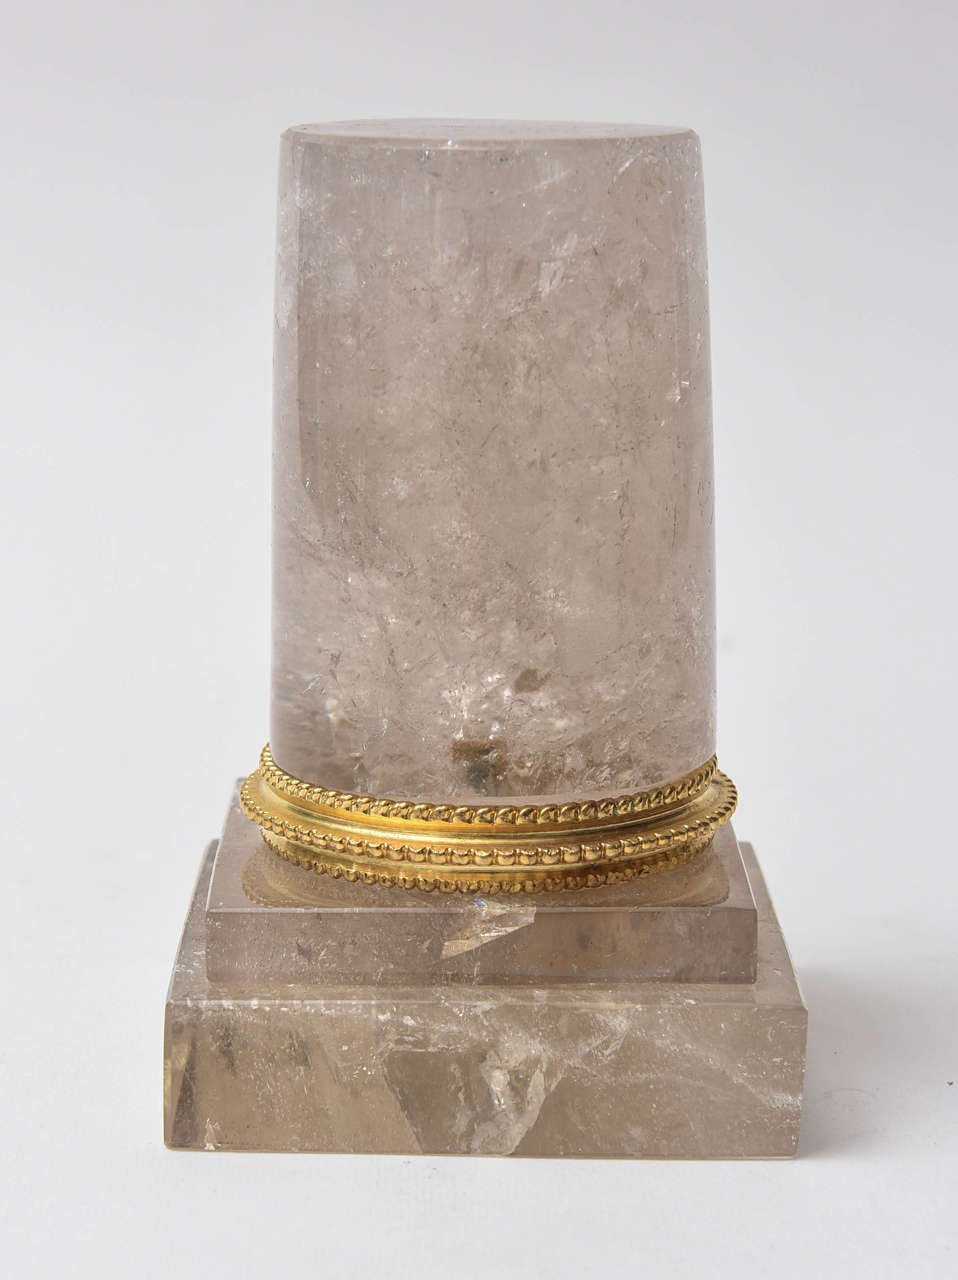 Partial rock crystal column on a double square base. Brass polished ring surrounds the base of the column.